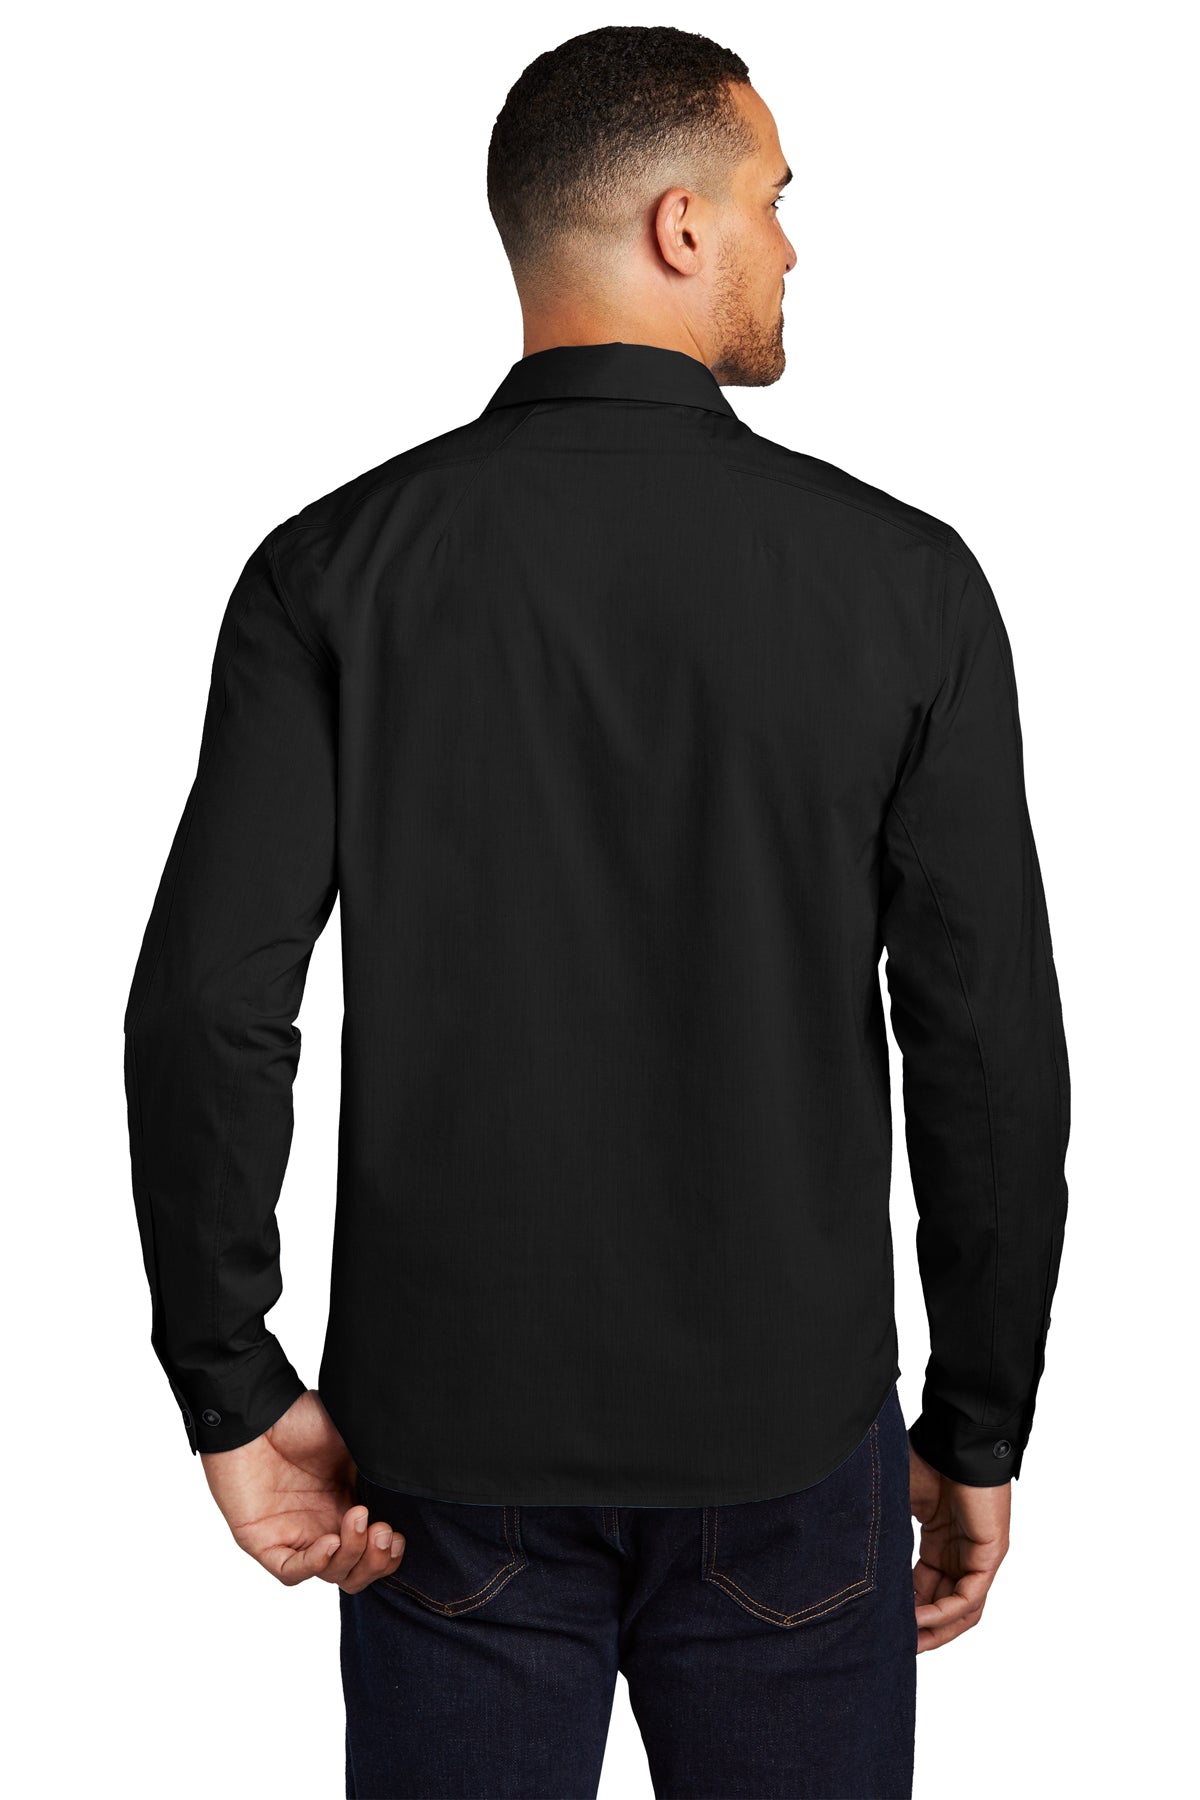 OGIO Commuter Branded Woven Shirts, Blacktop